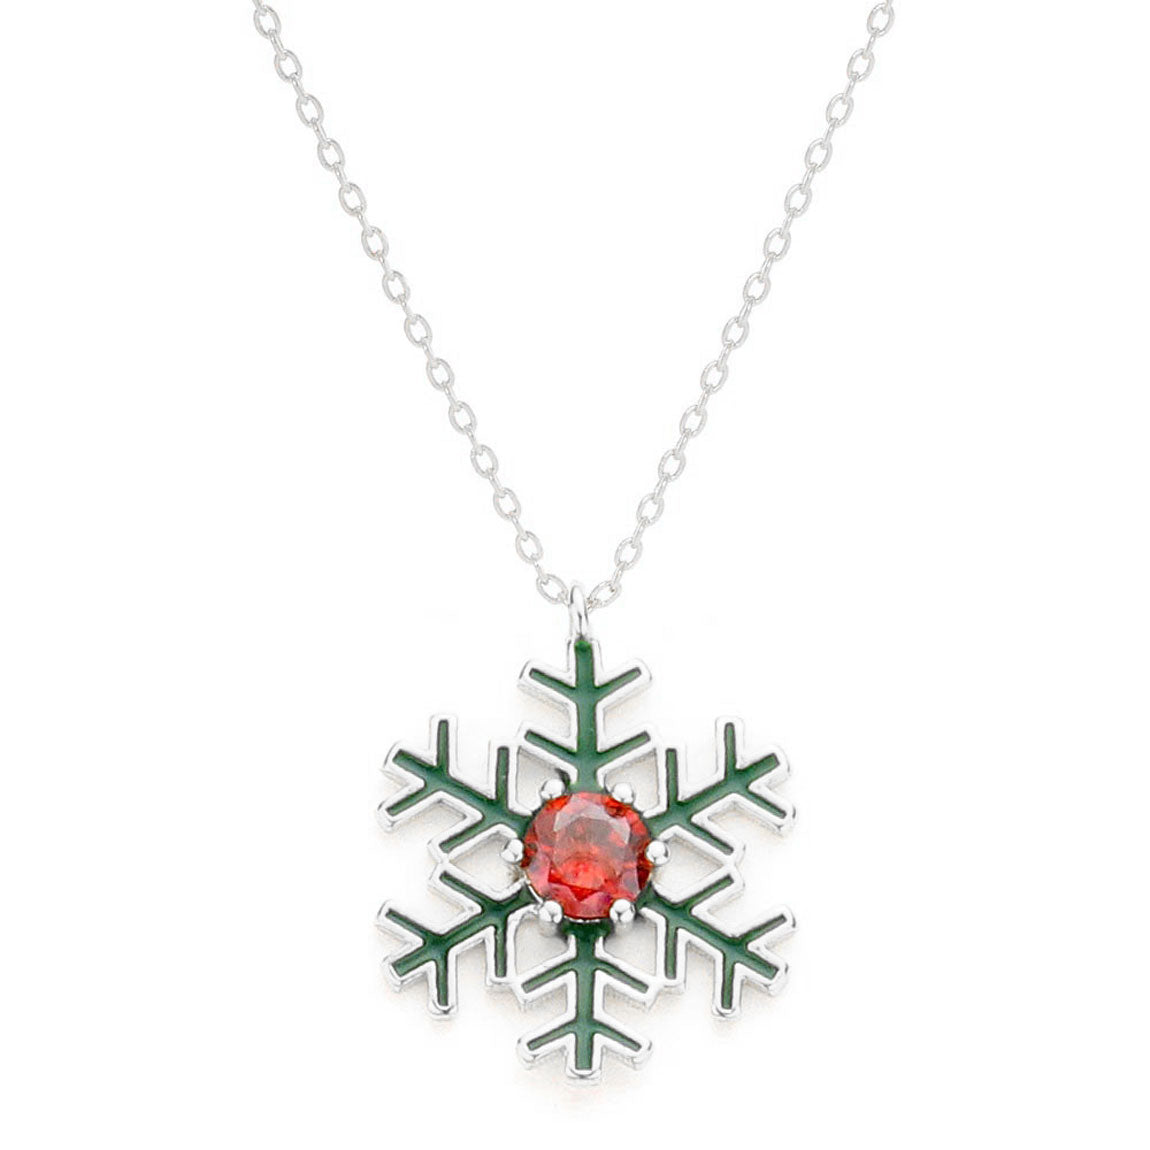 Rhodium Gold White Dipped CZ Snowflake Pendant Necklace, Get ready with these Pendant Necklace, put on a pop of color to complete your ensemble. Perfect for adding just the right amount of shimmer & shine and a touch of class to special events. Perfect Birthday Gift, Anniversary Gift, Mother's Day Gift, Graduation Gift.